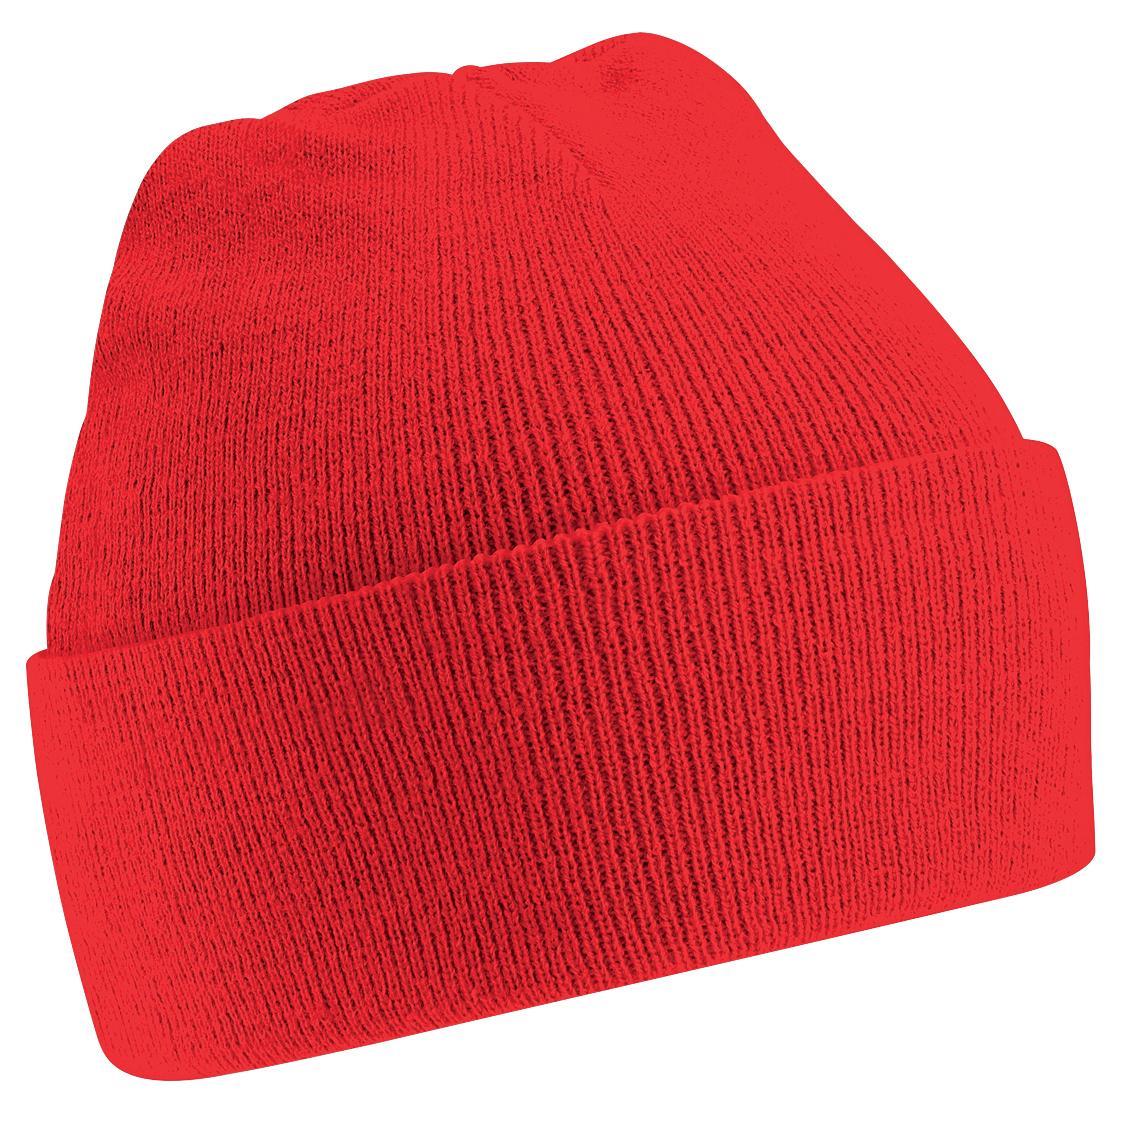 Beechfield Soft Feel Knitted Winter Hat (Bright Red) (One Size)